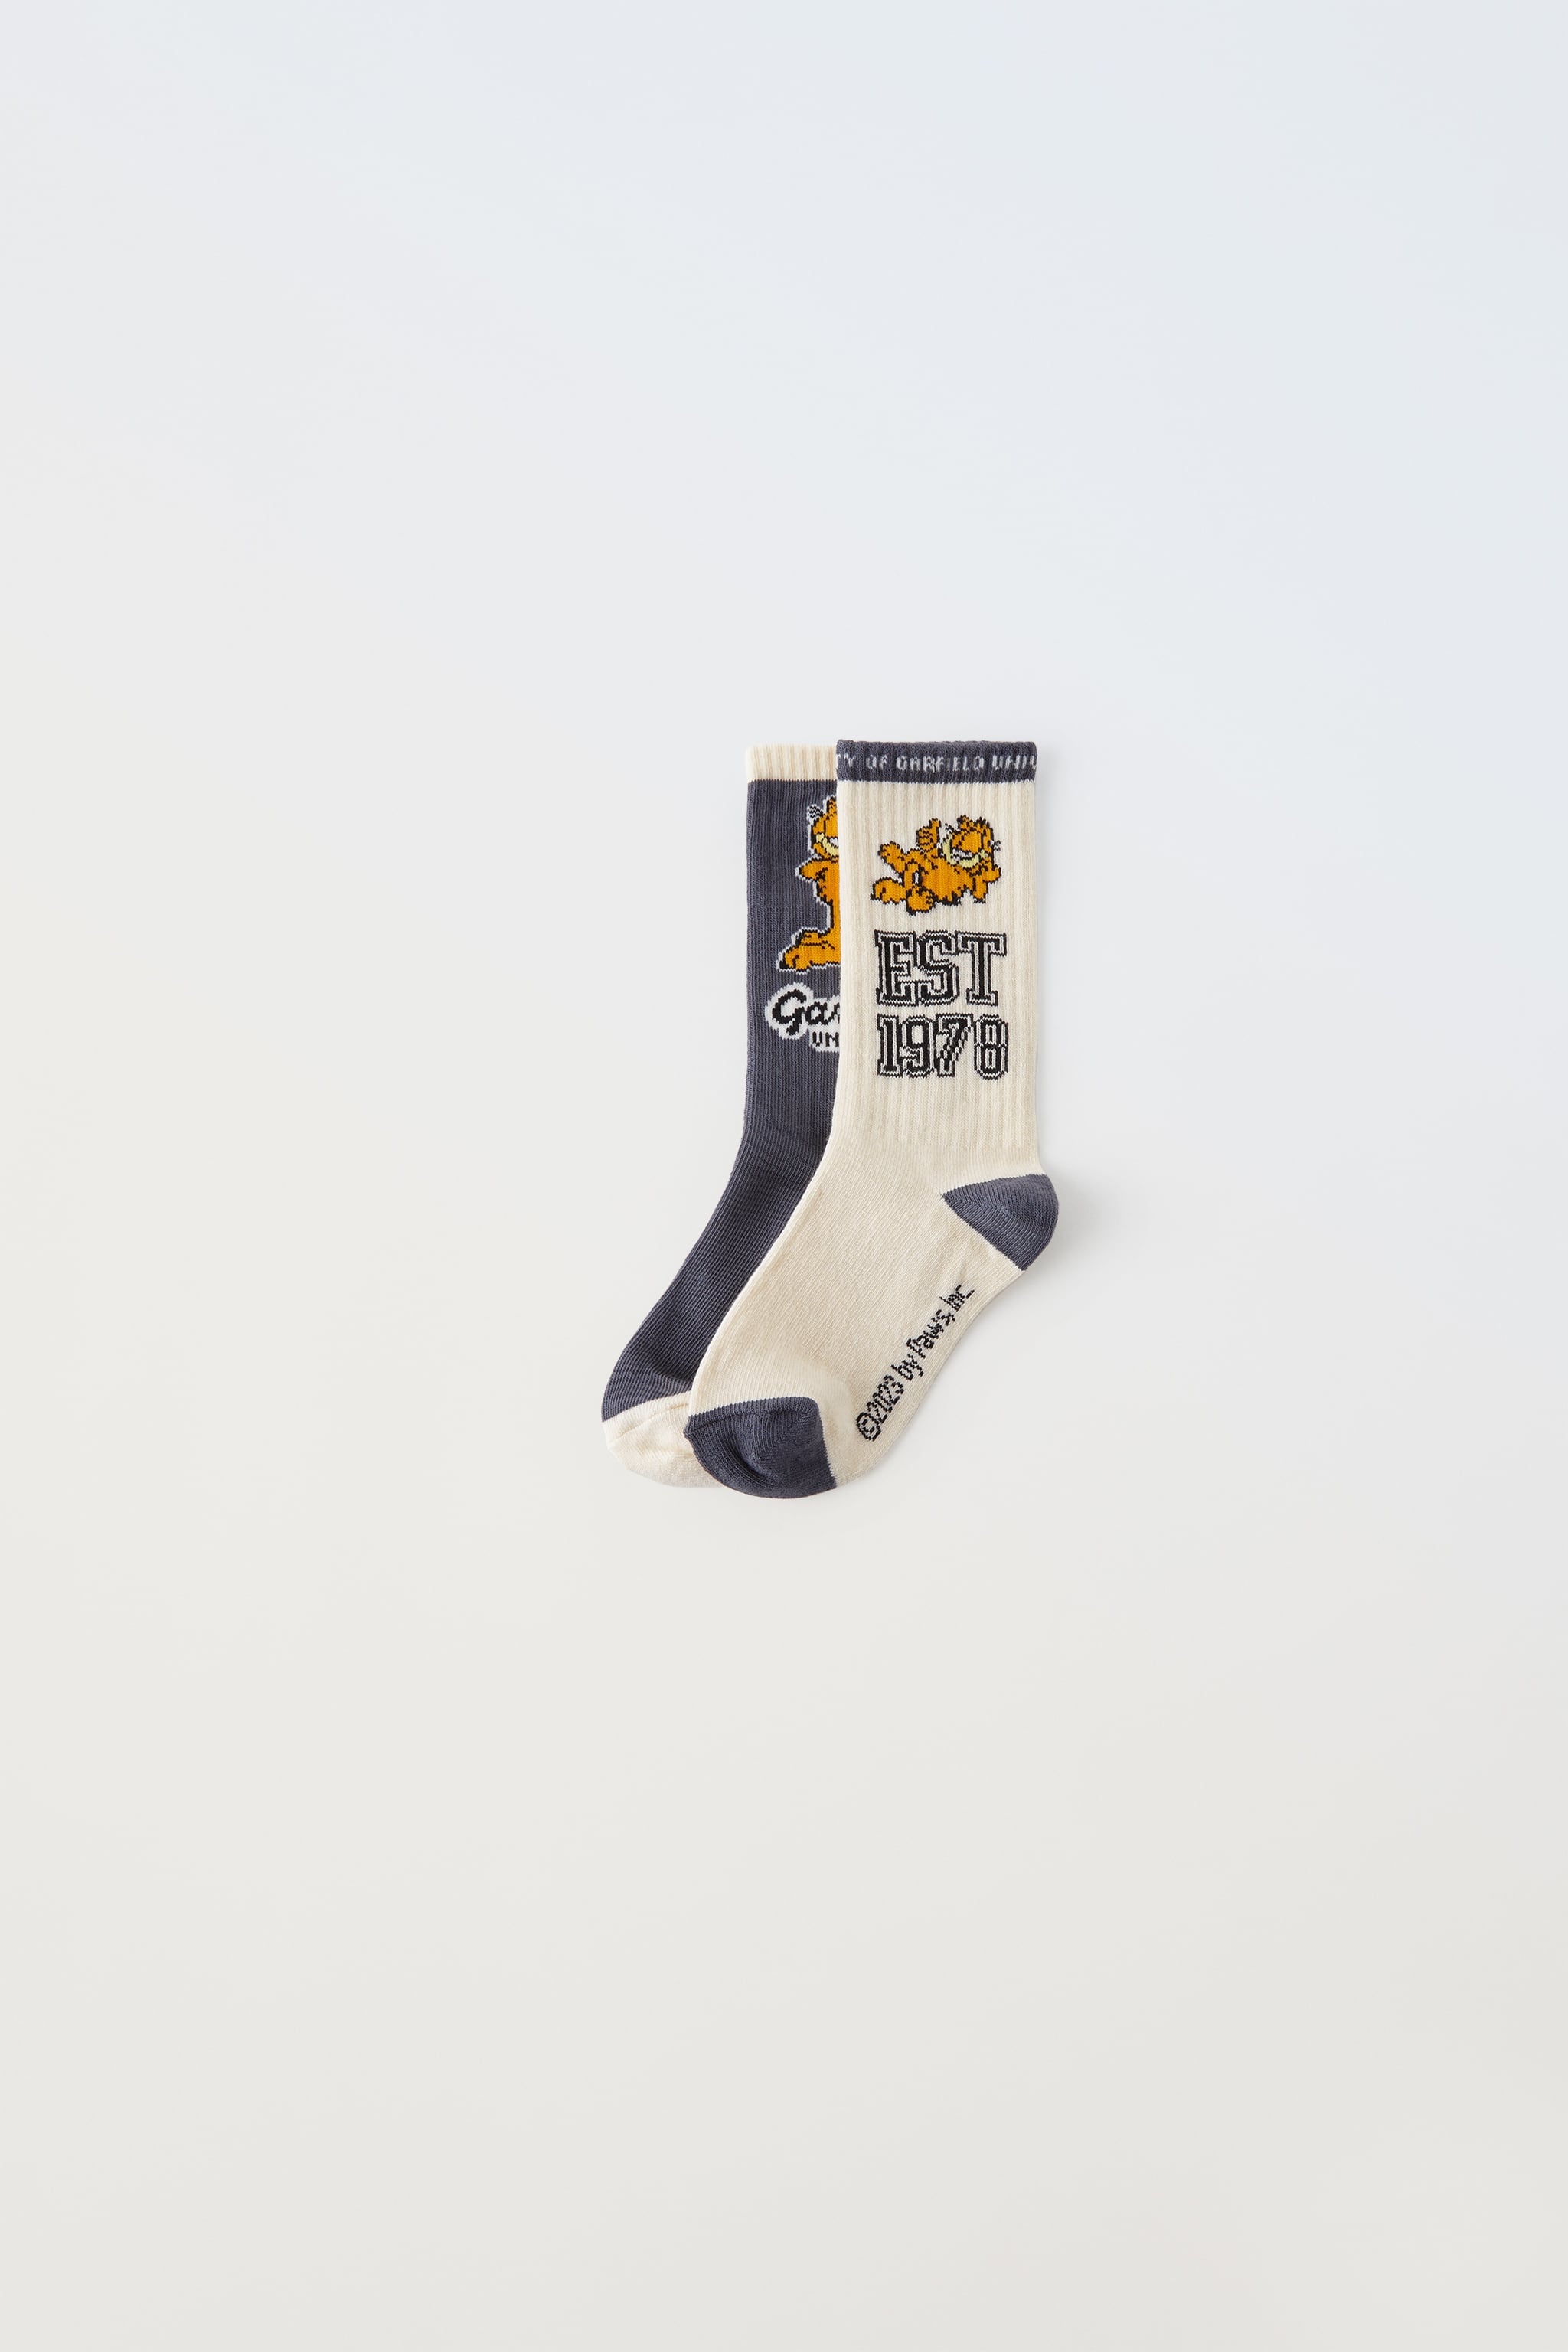 6-14 YEARS/ TWO PACK OF GARFIELD © PAWS INC LONG SOCKS